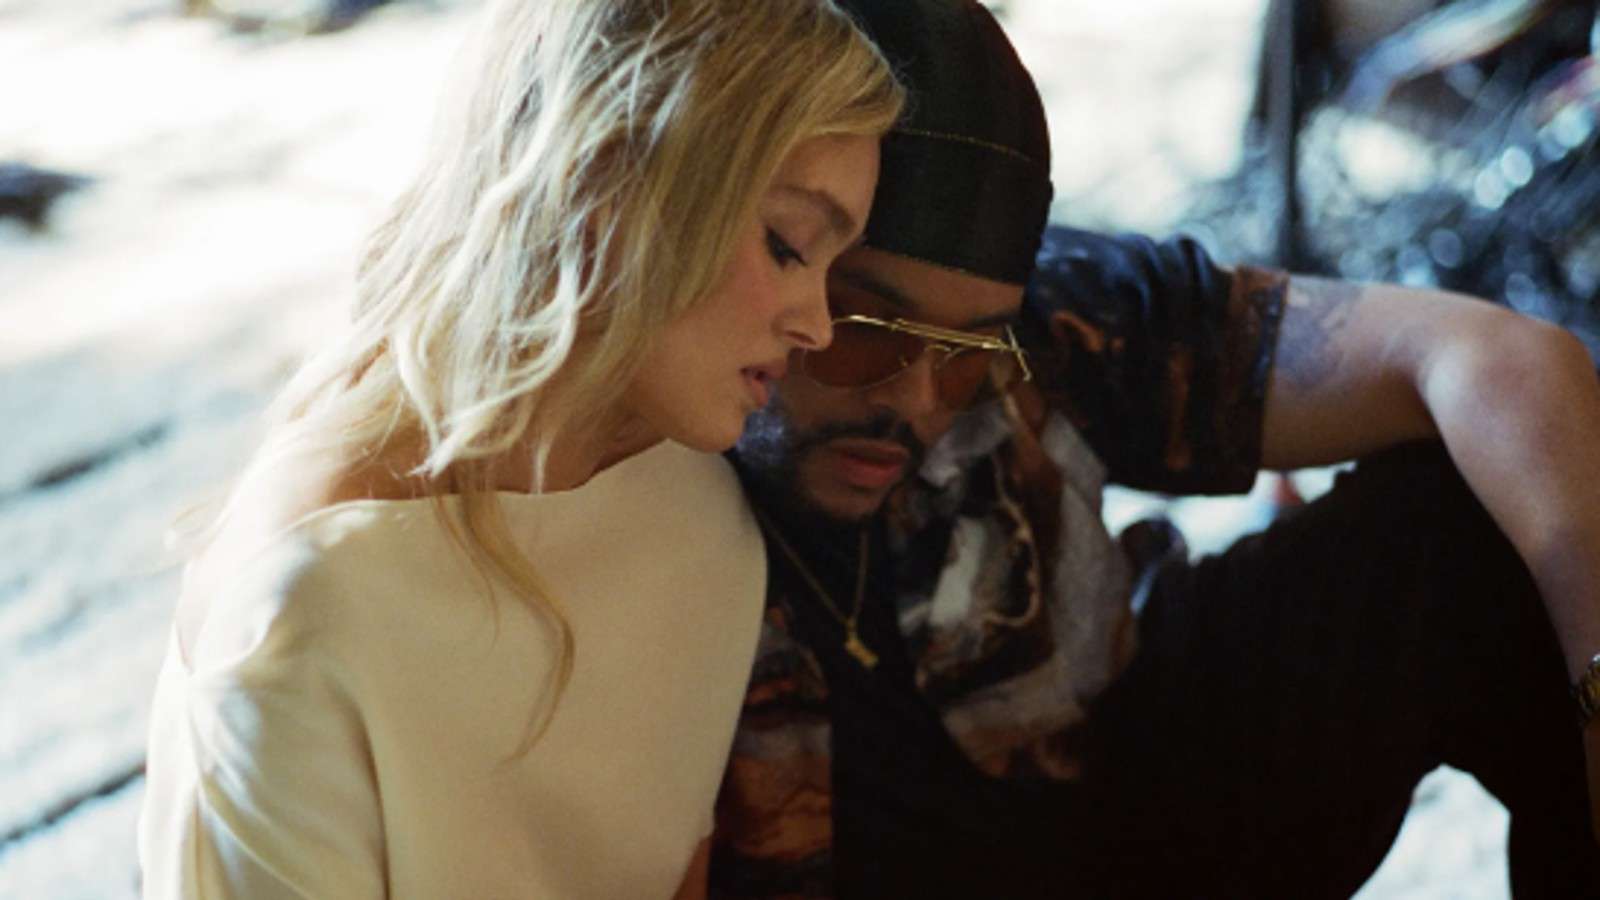 The Weeknd and Lily-Rose Depp in The Idol